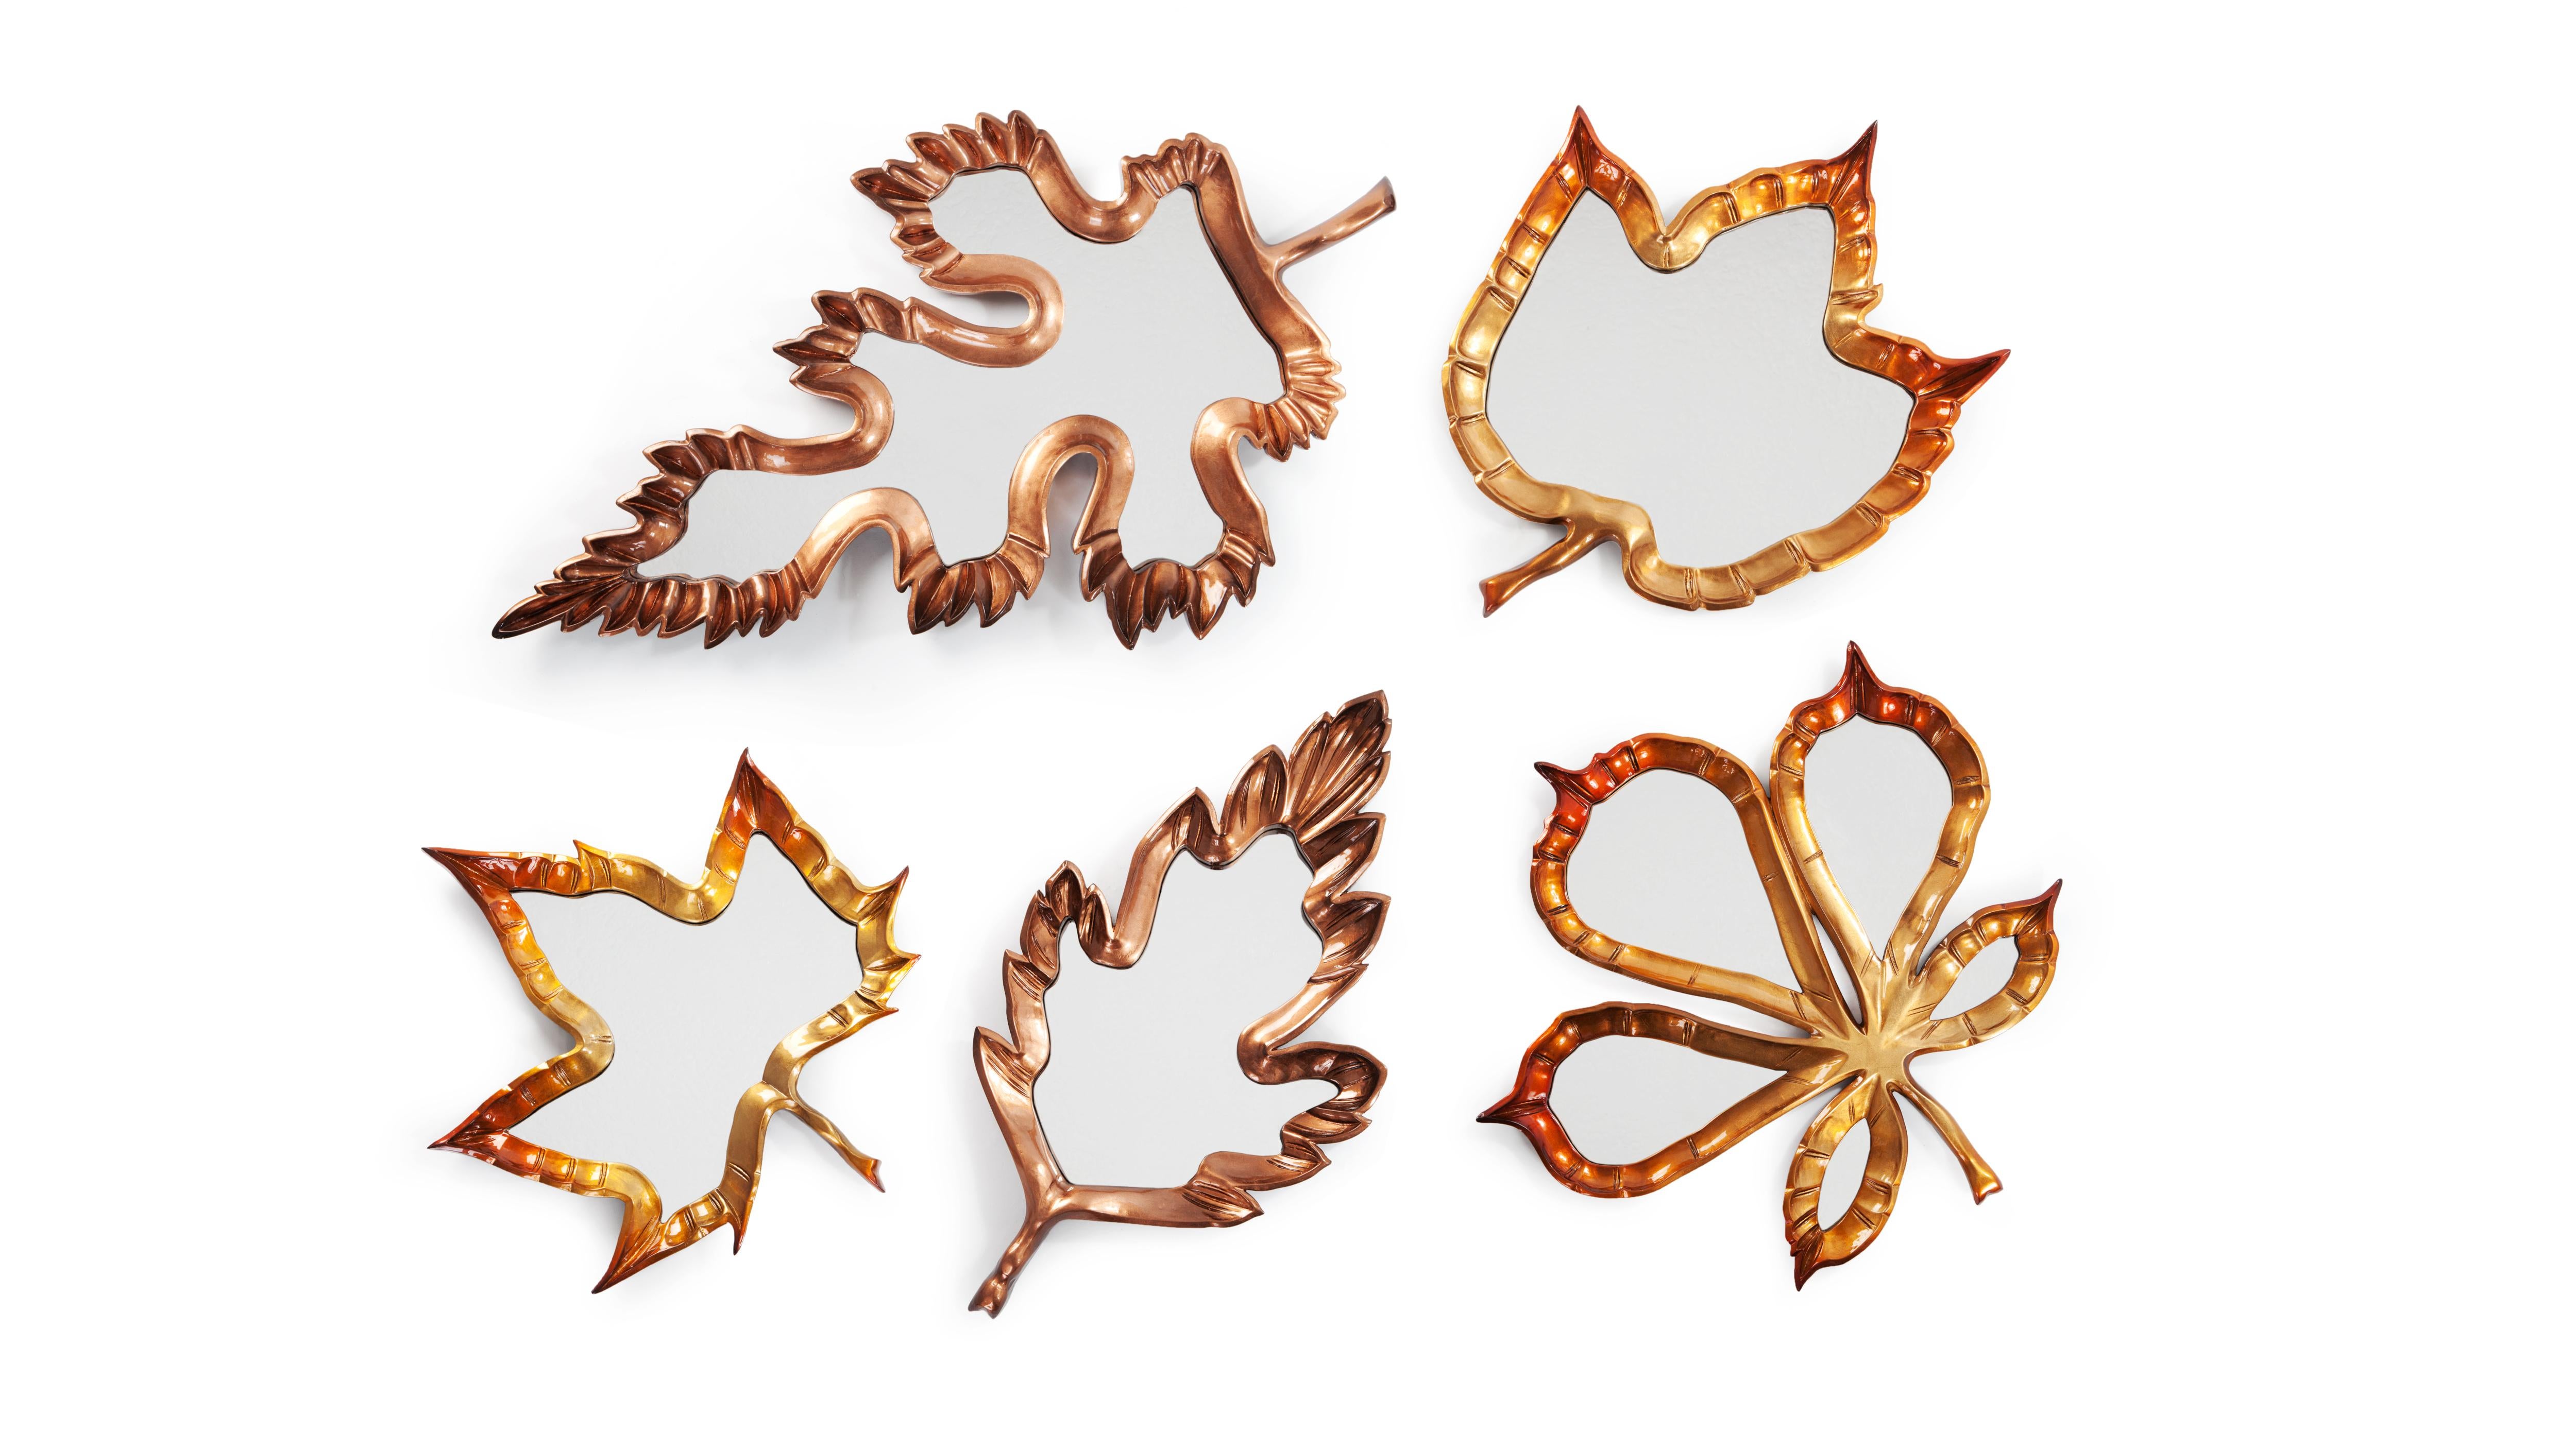 Set of 5 Fallen Leaves Mirrors by InsidherLand
Dimensions: 
Mirror 1 - D 7 x W 43 x H 77 cm
Mirror 2 - D 7 x W 32 x 62 cm
Mirror 3 - D 5 x W 57 x H 55 cm
Mirror 4 - D 5 x W 43 x h 49 cm
Mirror 5 - D 5 x W 36 x H 45 cm
Materials: Hand-carved wood